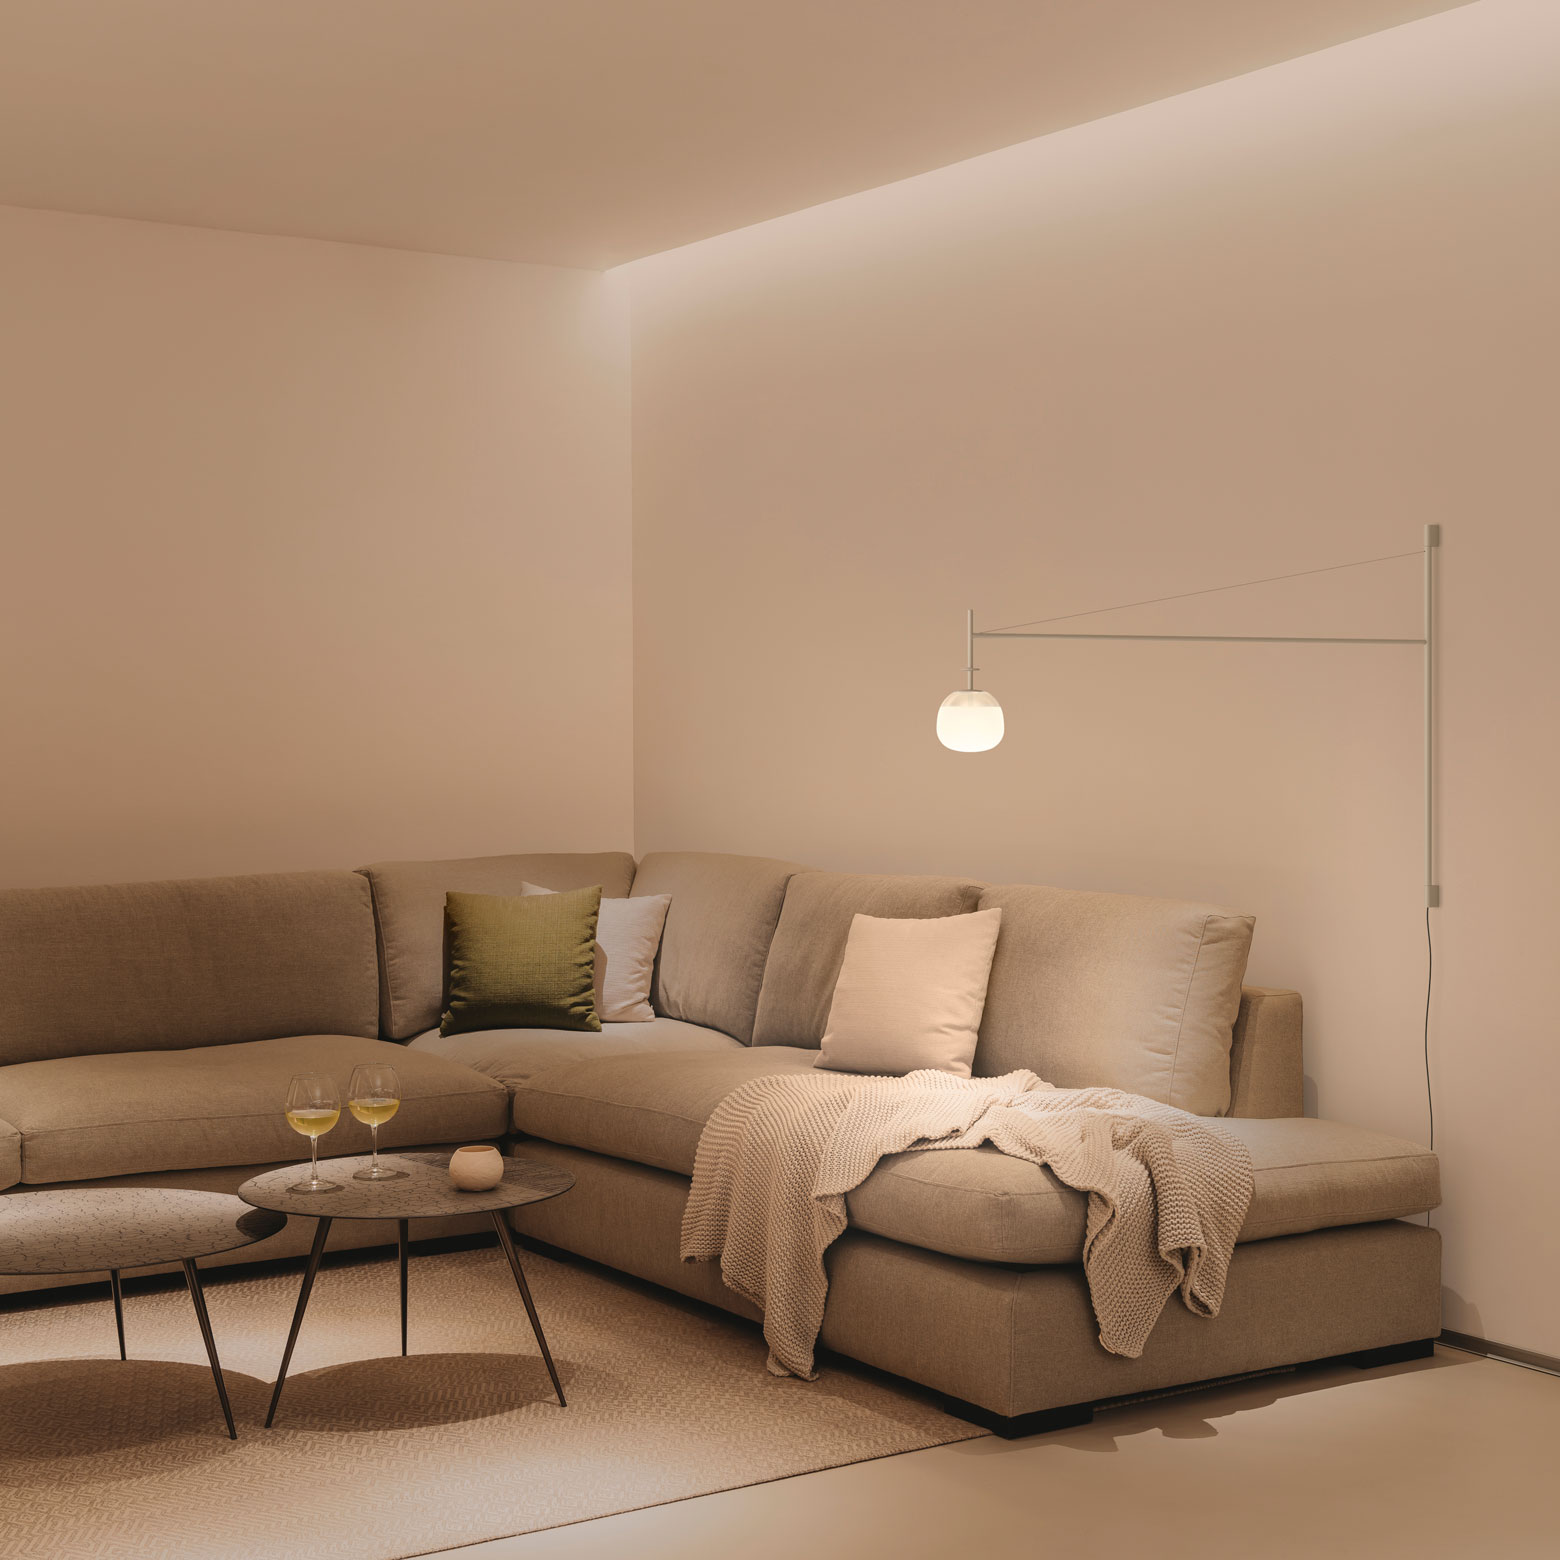 Vibia The Edit - Atmospheres designed for winter wellbeing - Tempo